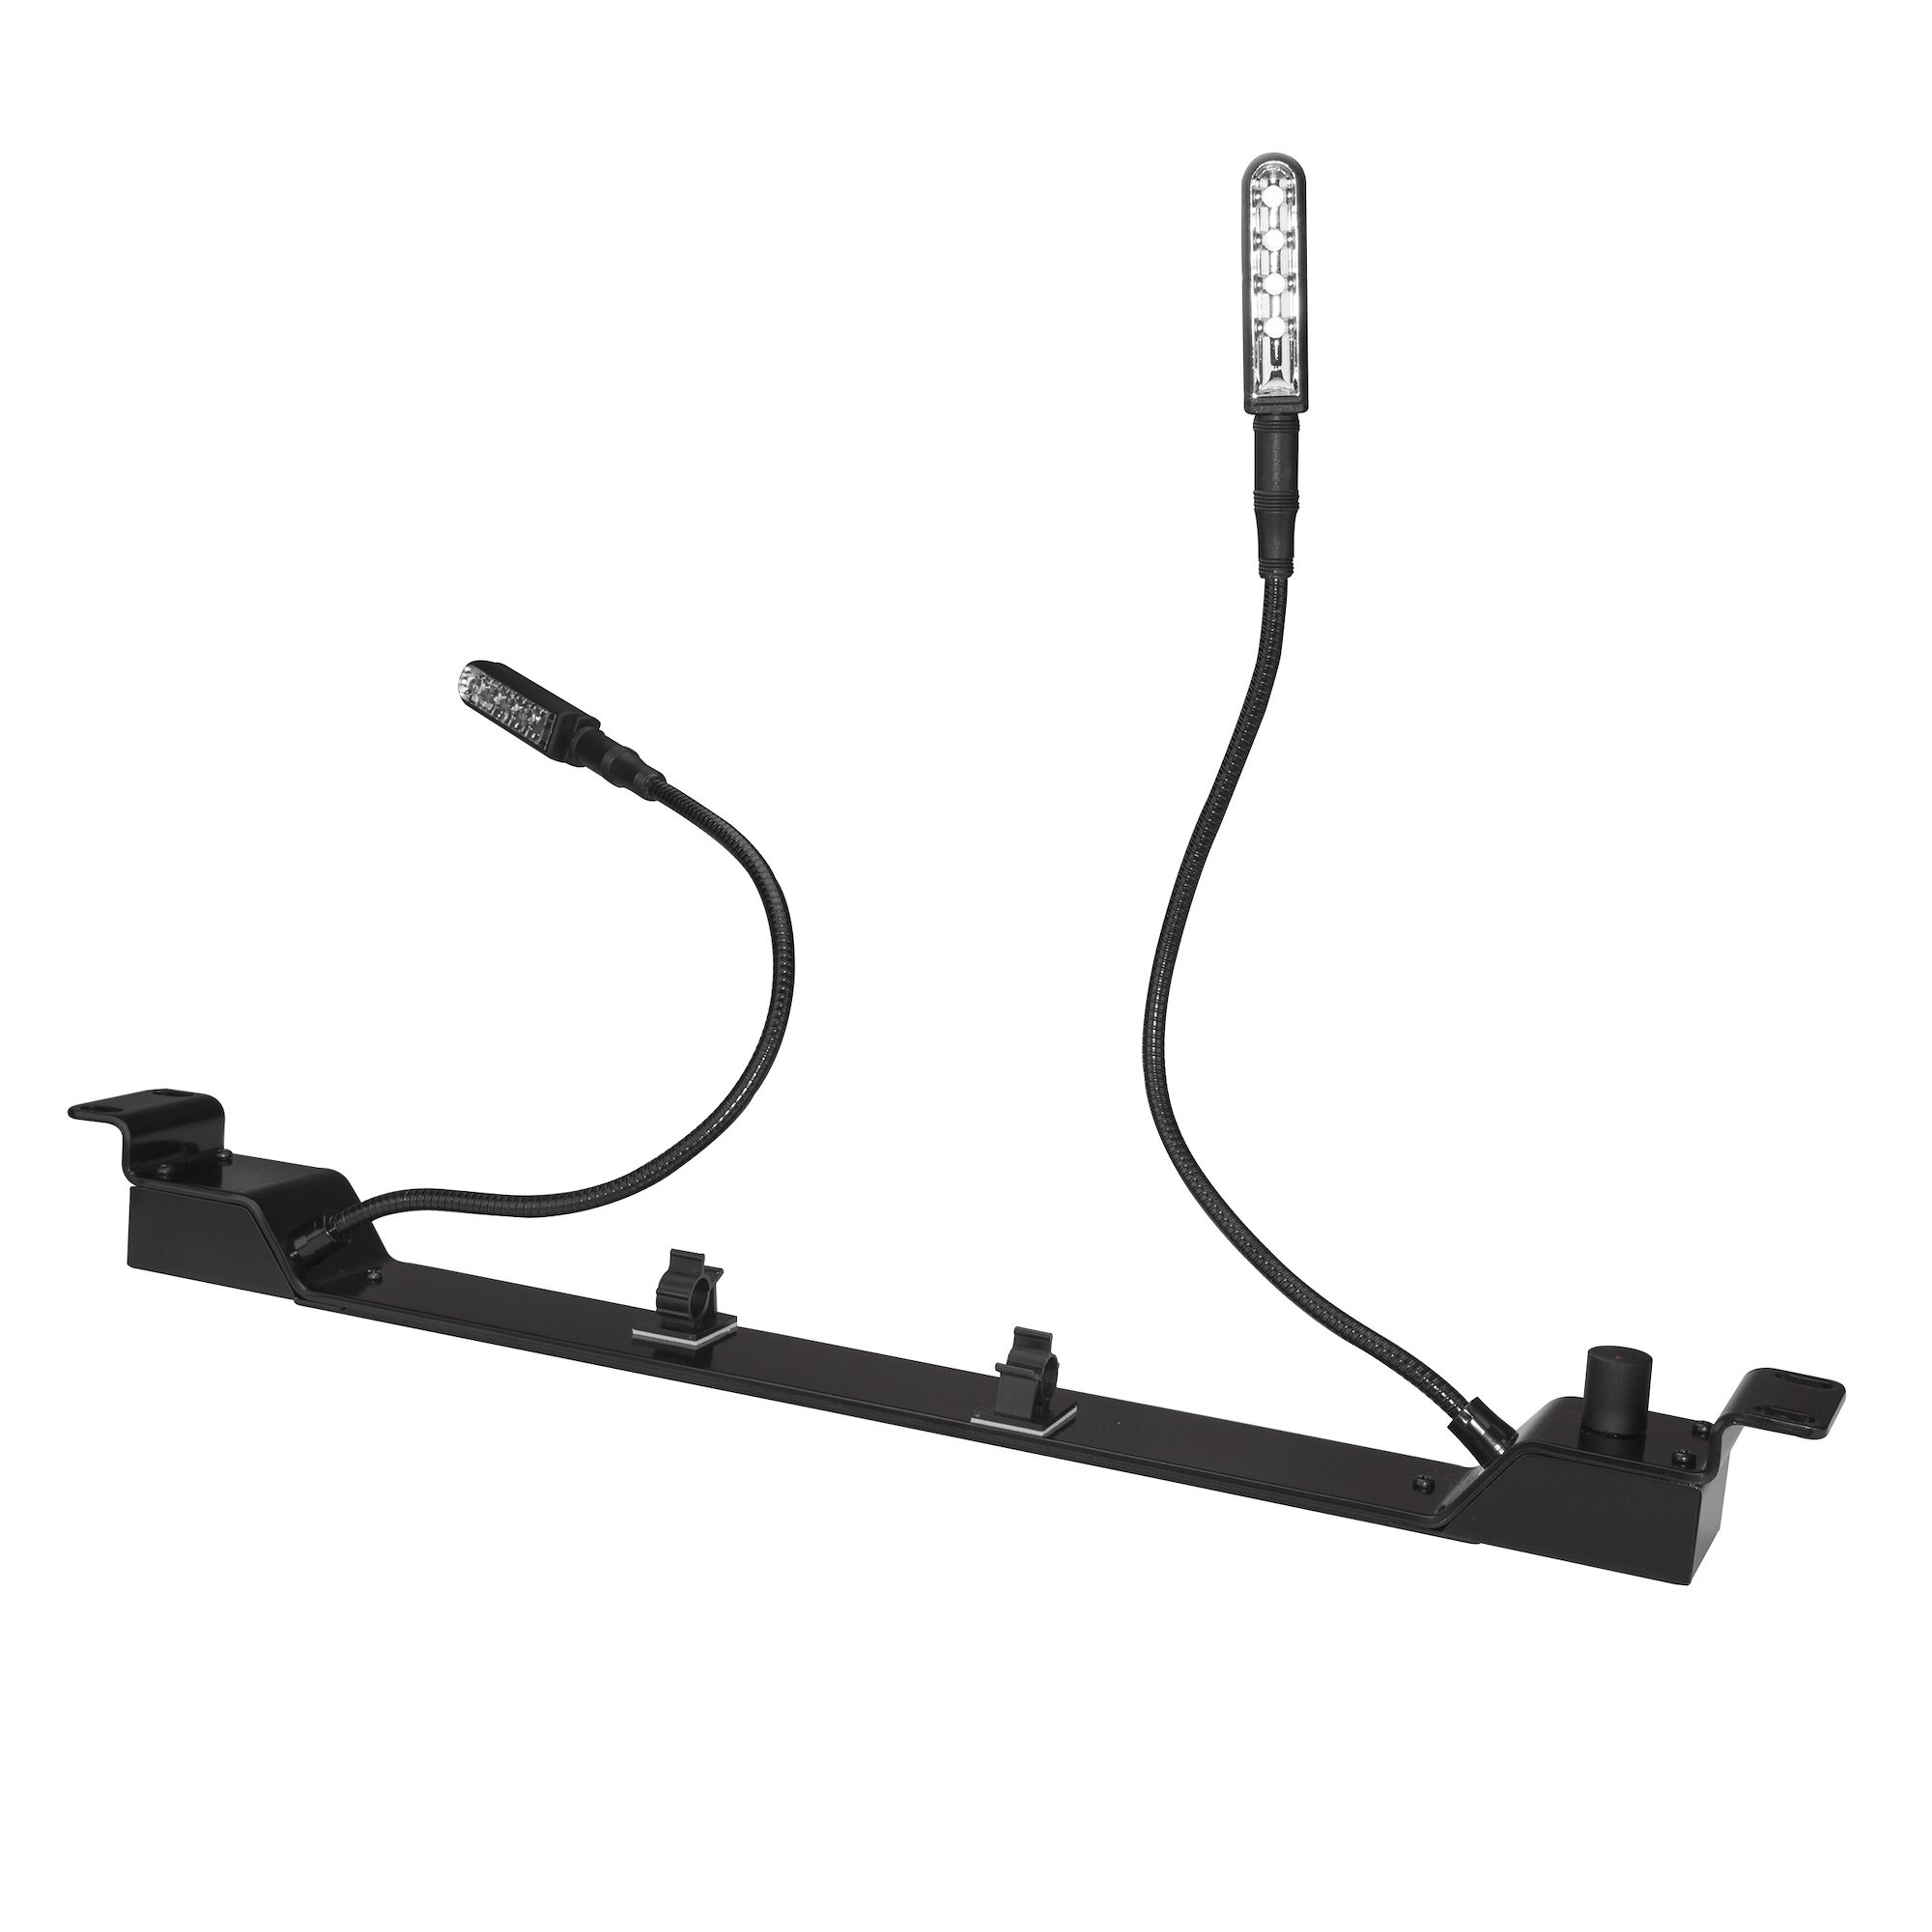 StarTech 1U 19" Rack Mount Light Panel  with Dimmable LED and Flexible Gooseneck Arms